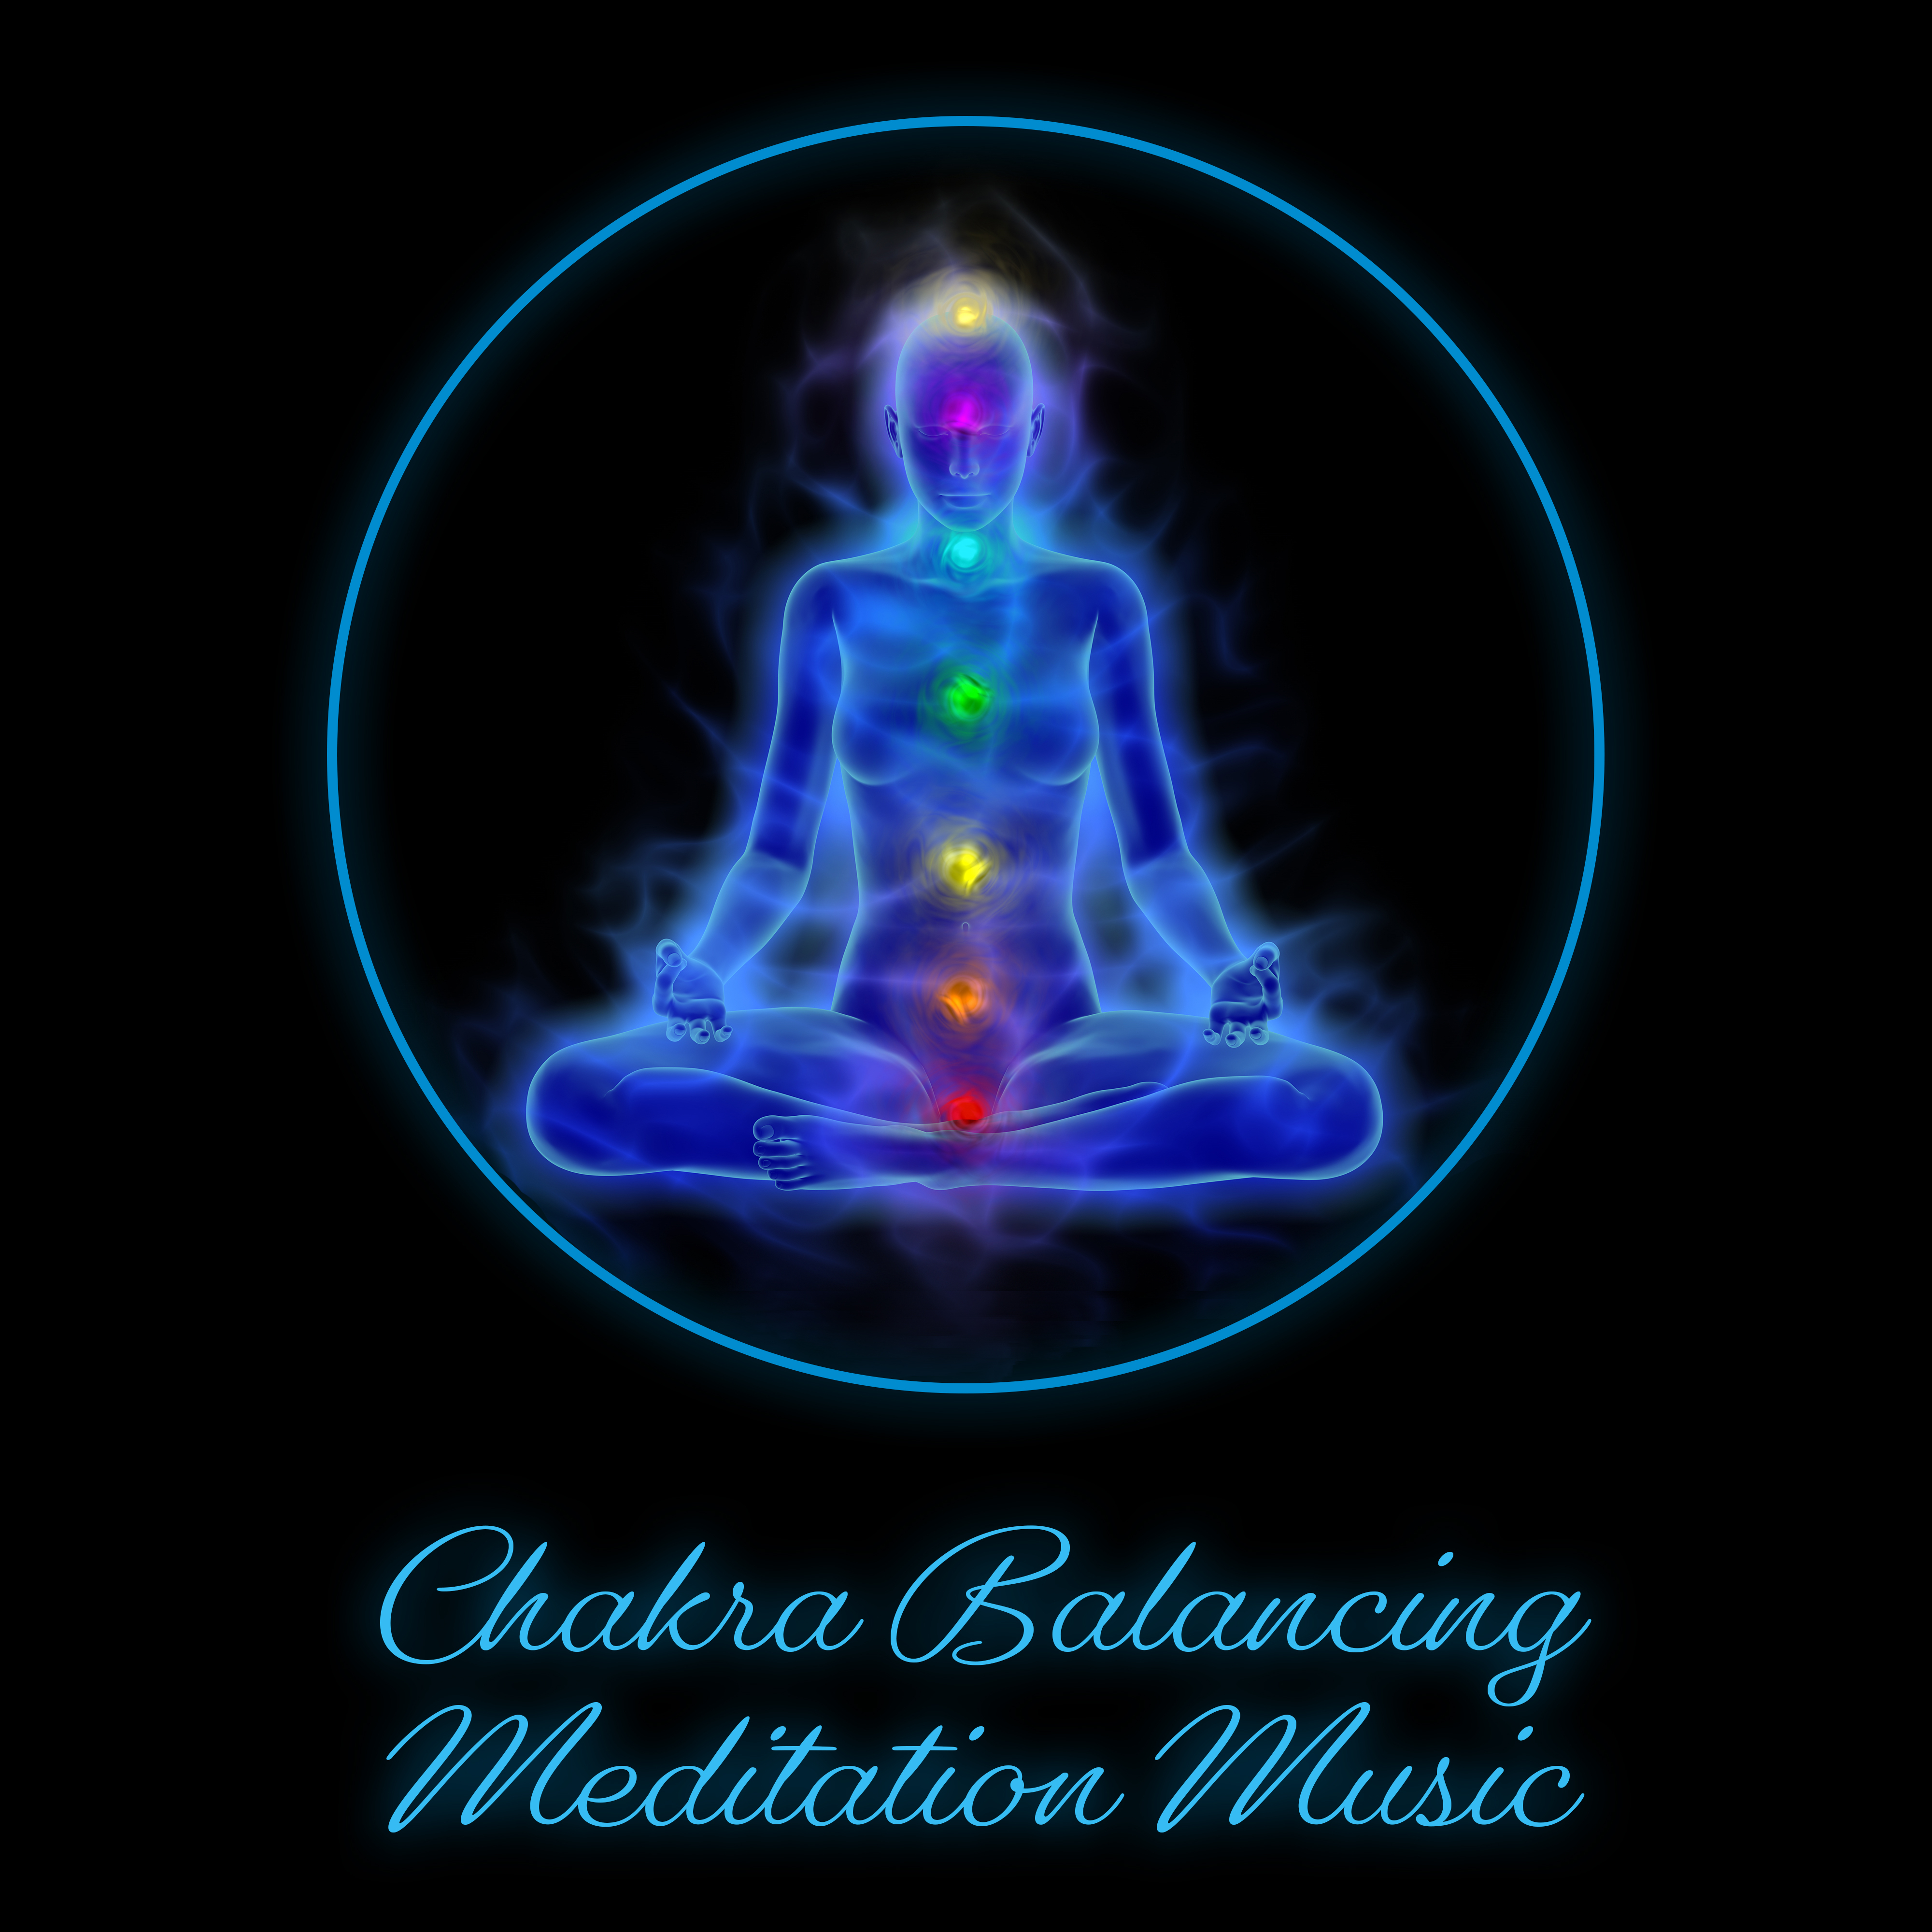 Chakra Balancing Meditation Music  Yoga New Age Melodies for Deep Relief, Pure Relax  Inner Calm